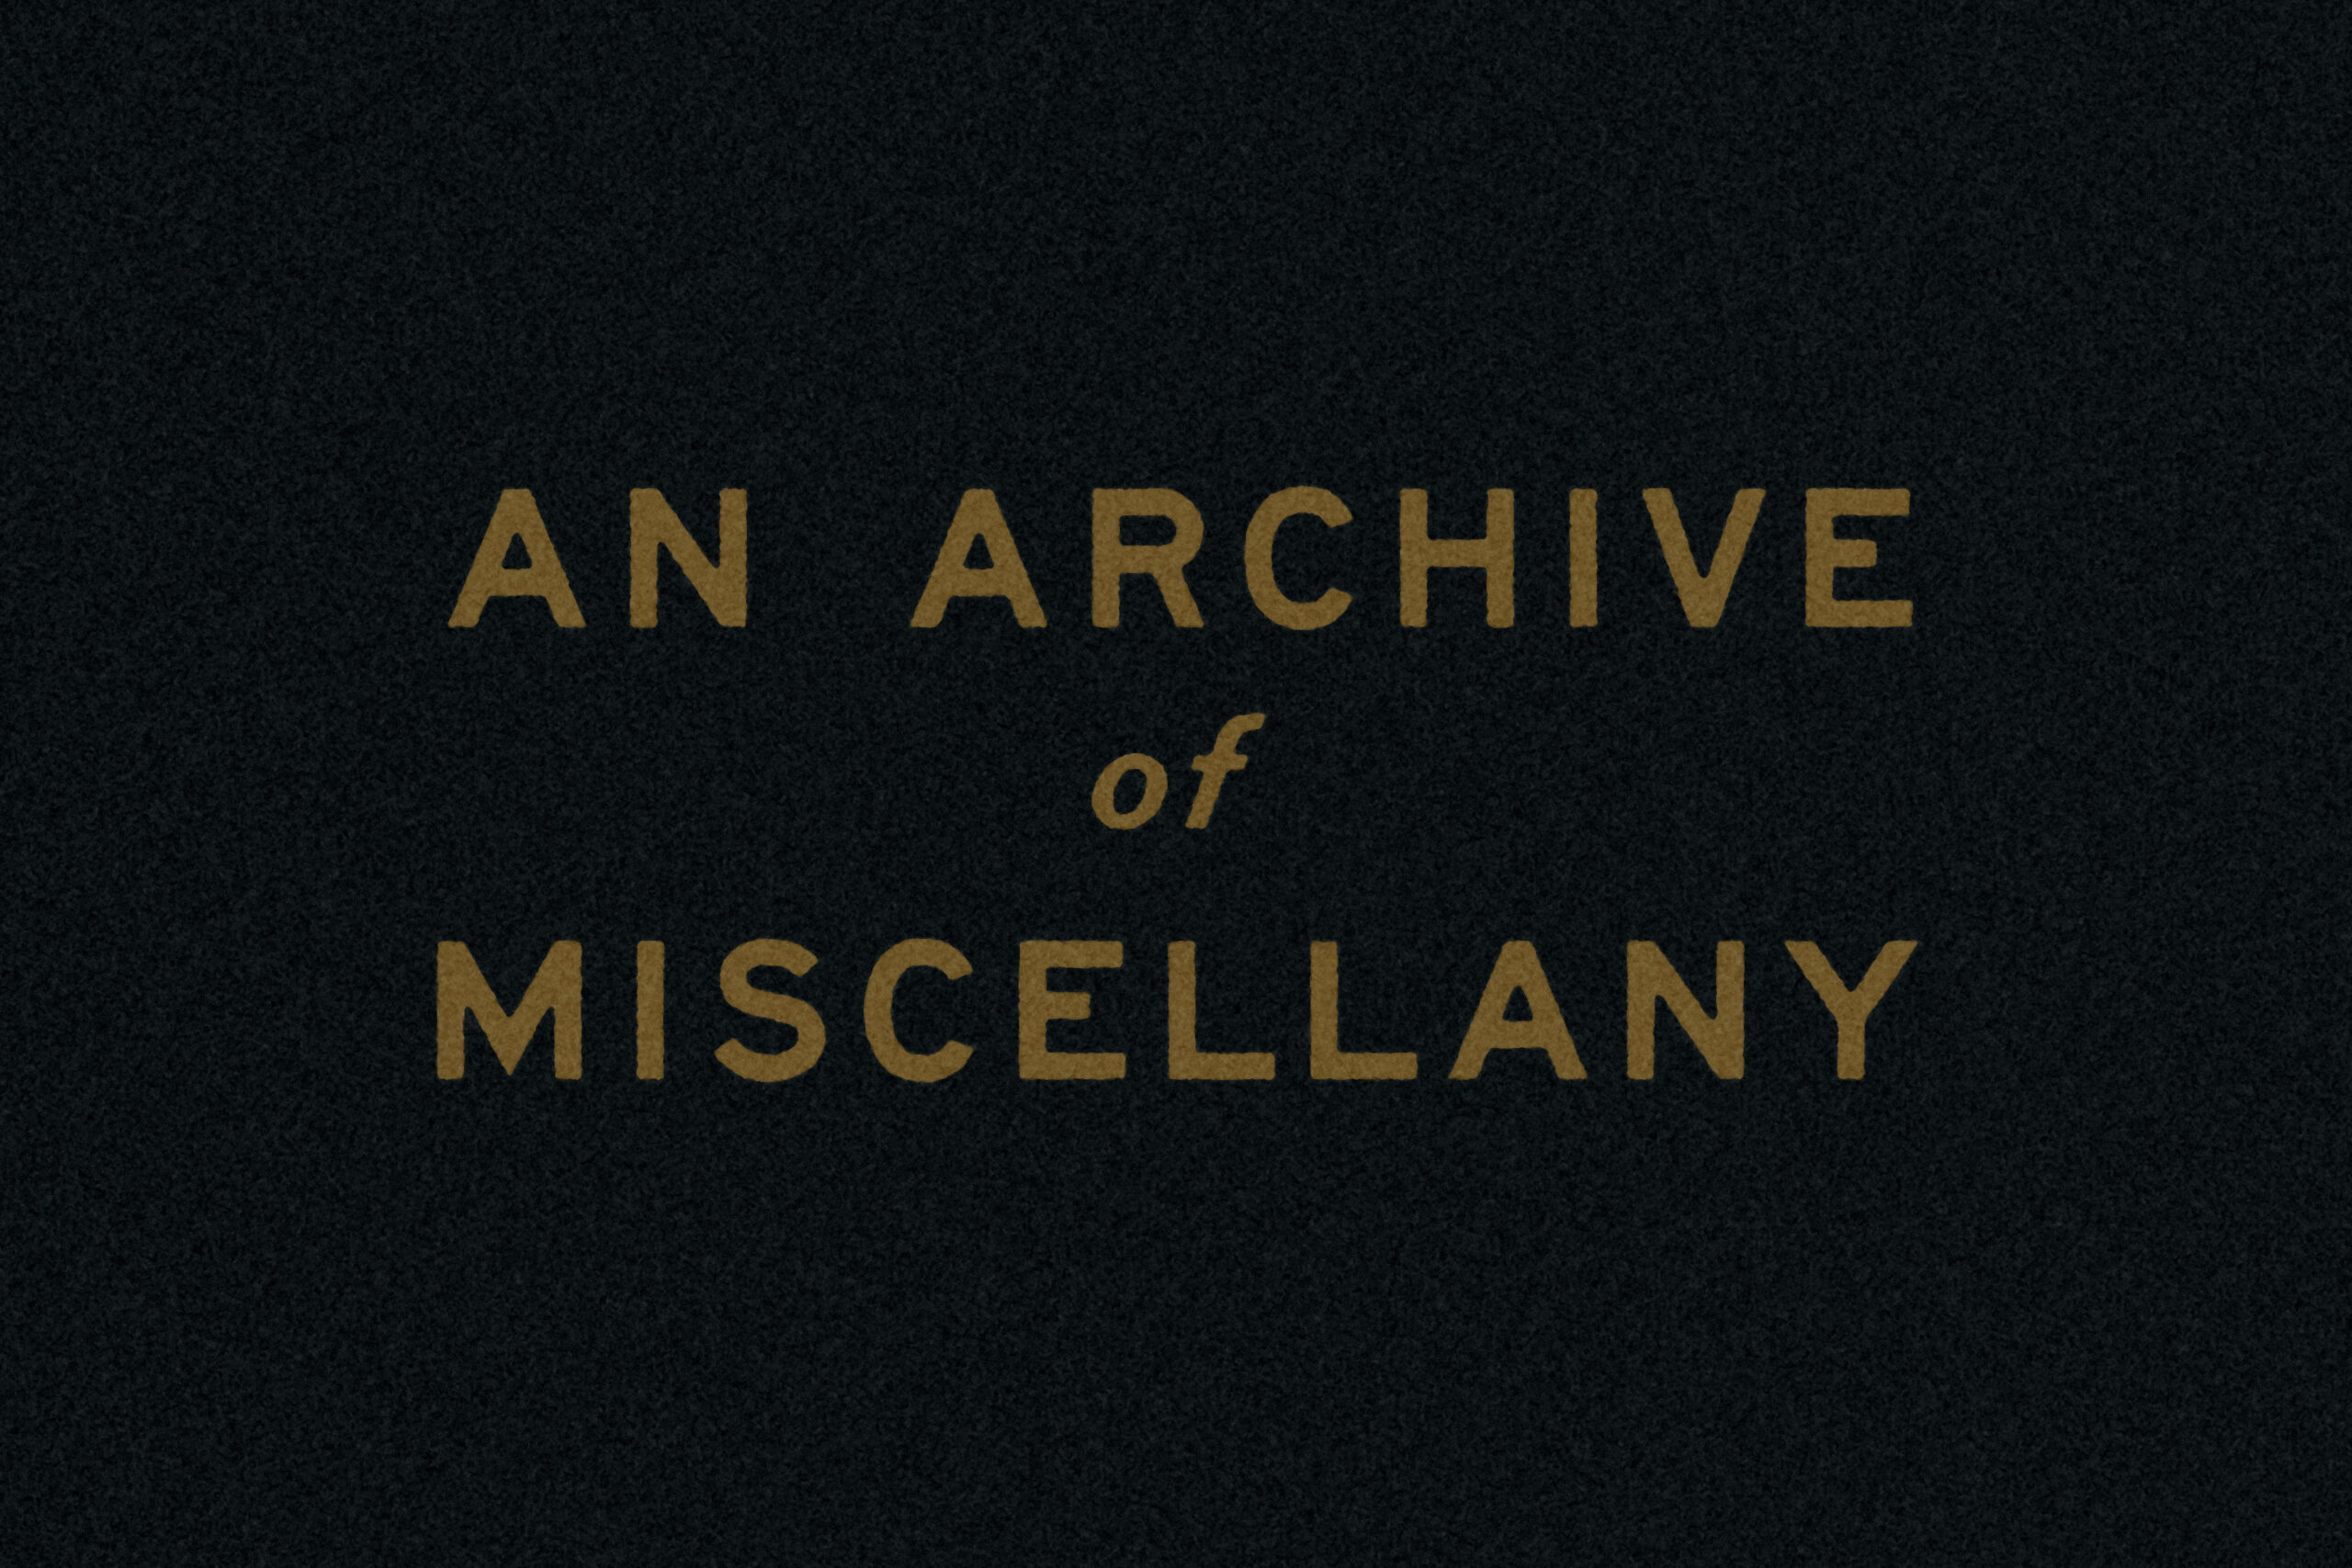 An Archive of Miscellany